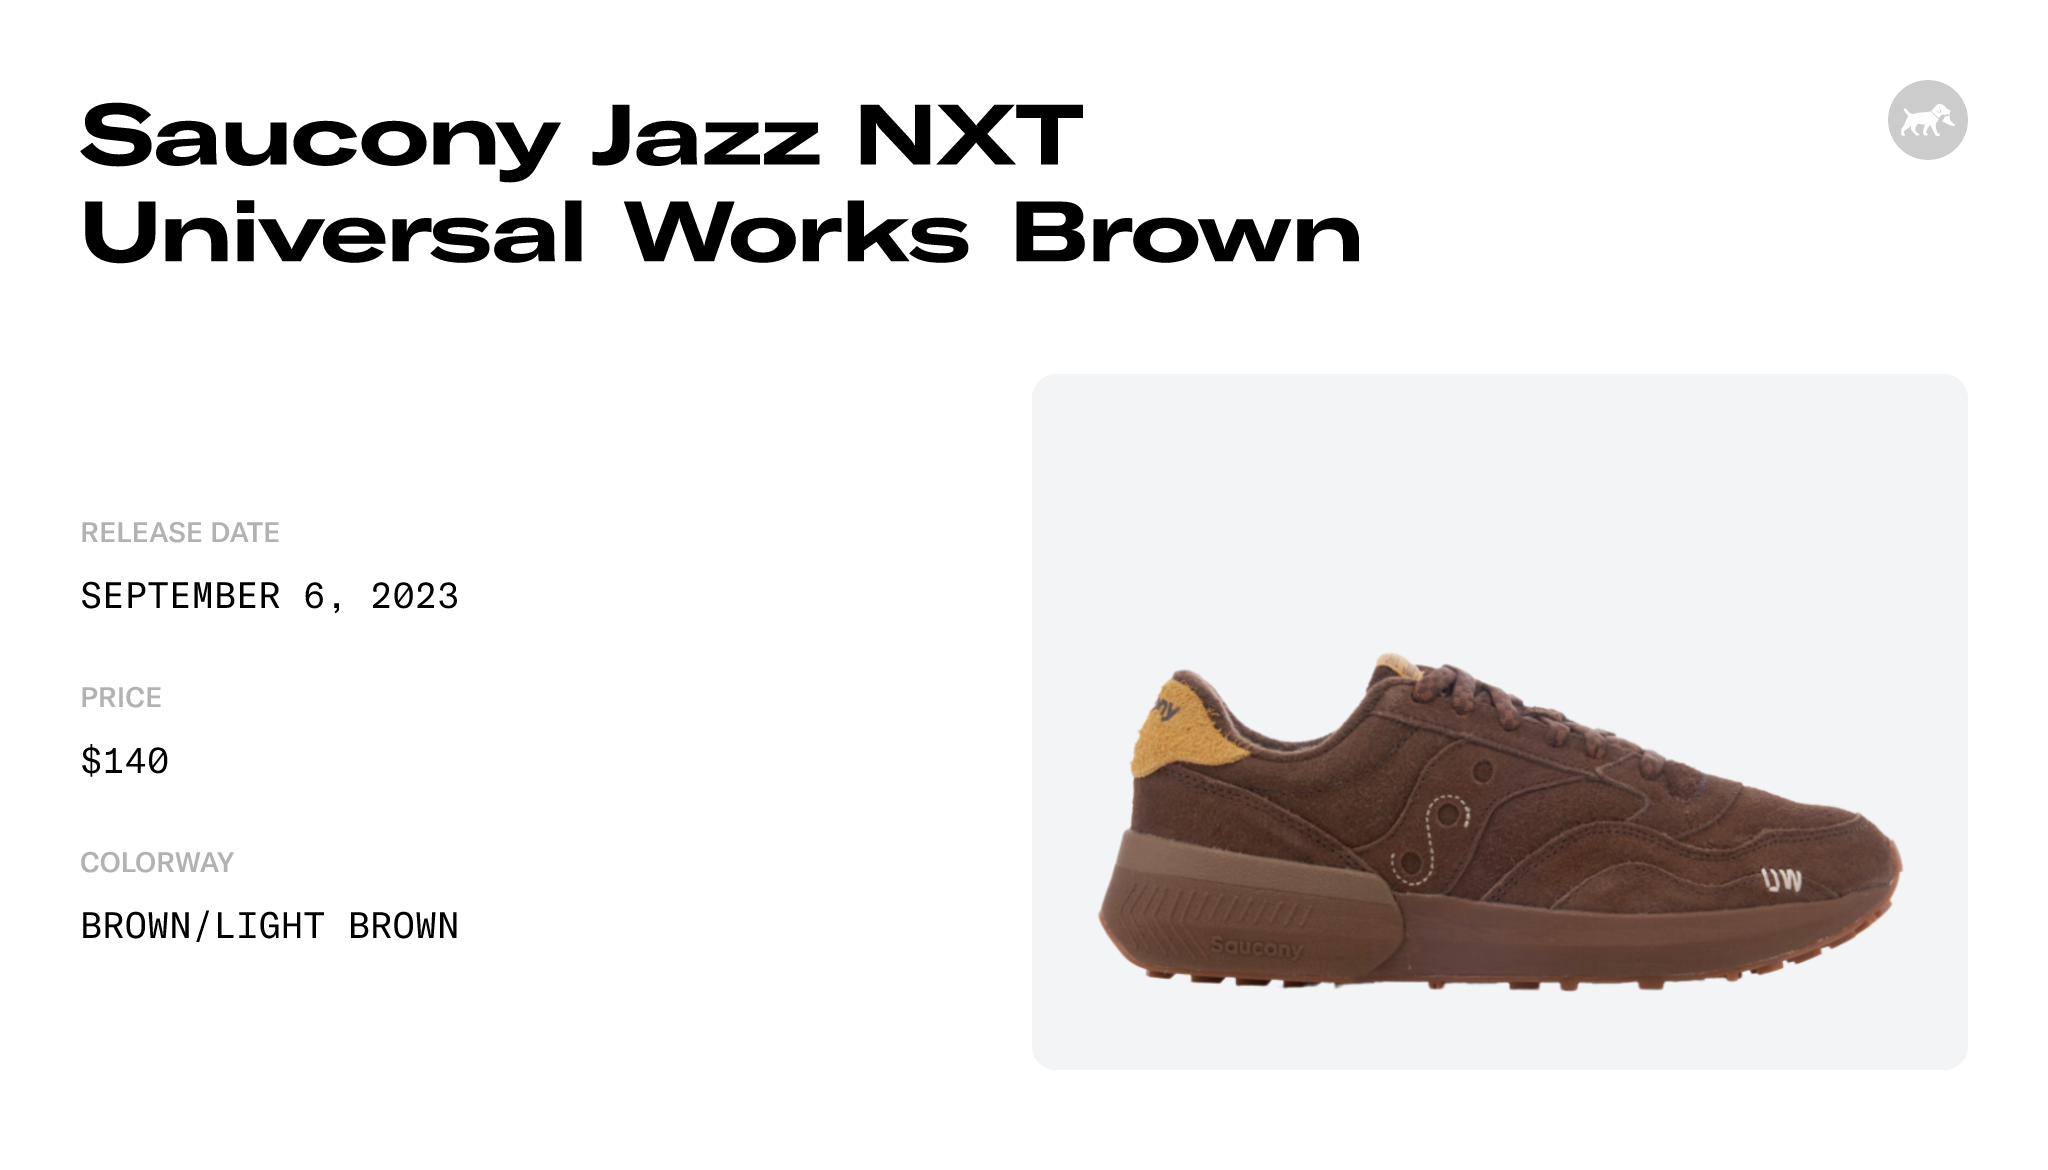 Saucony Jazz NXT Universal Works Brown - S70824-1 Raffles and